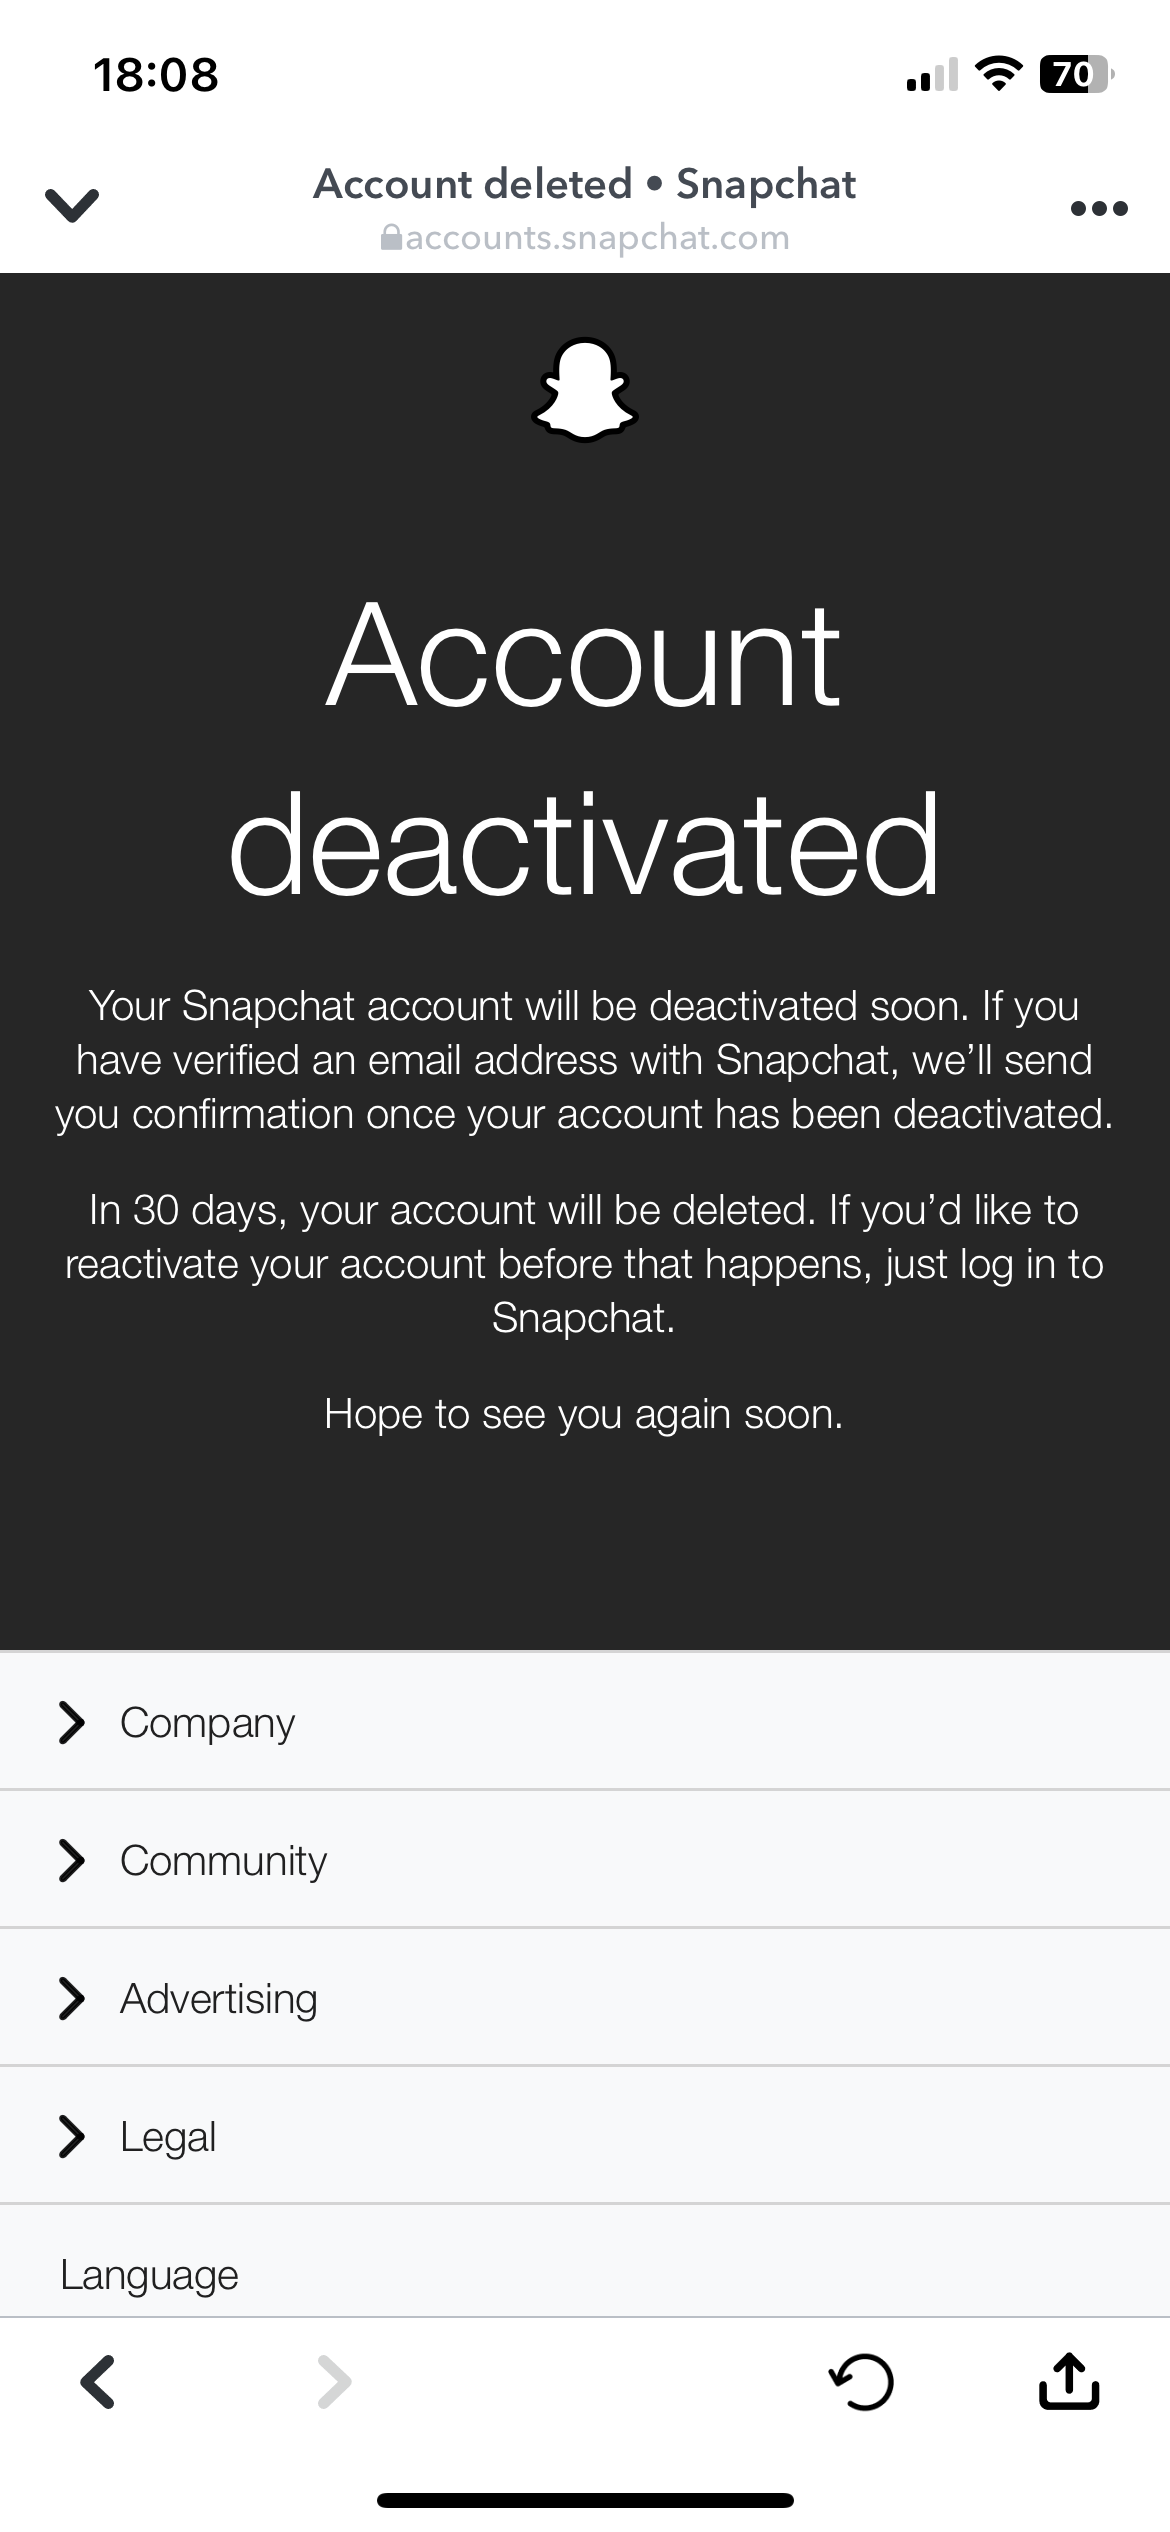 Snapchat's account deleted confirm